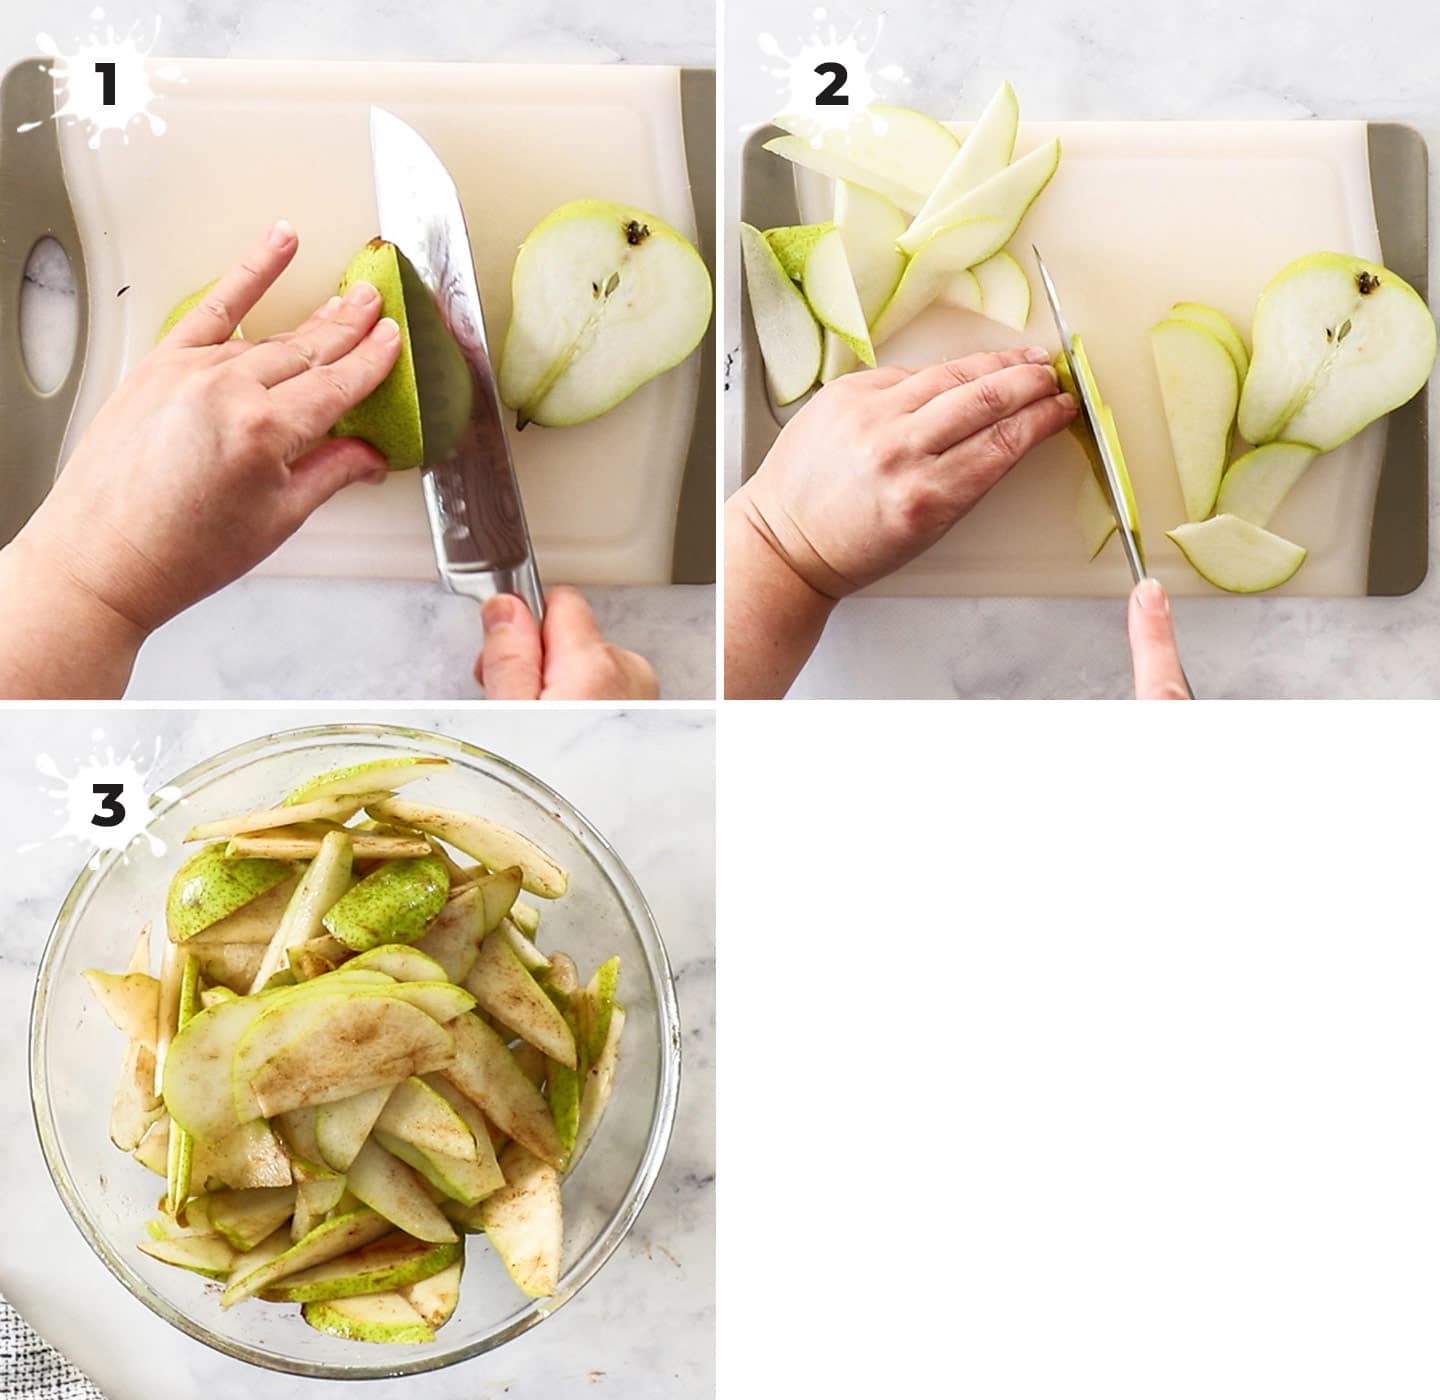 Showing how to prepare the pears.